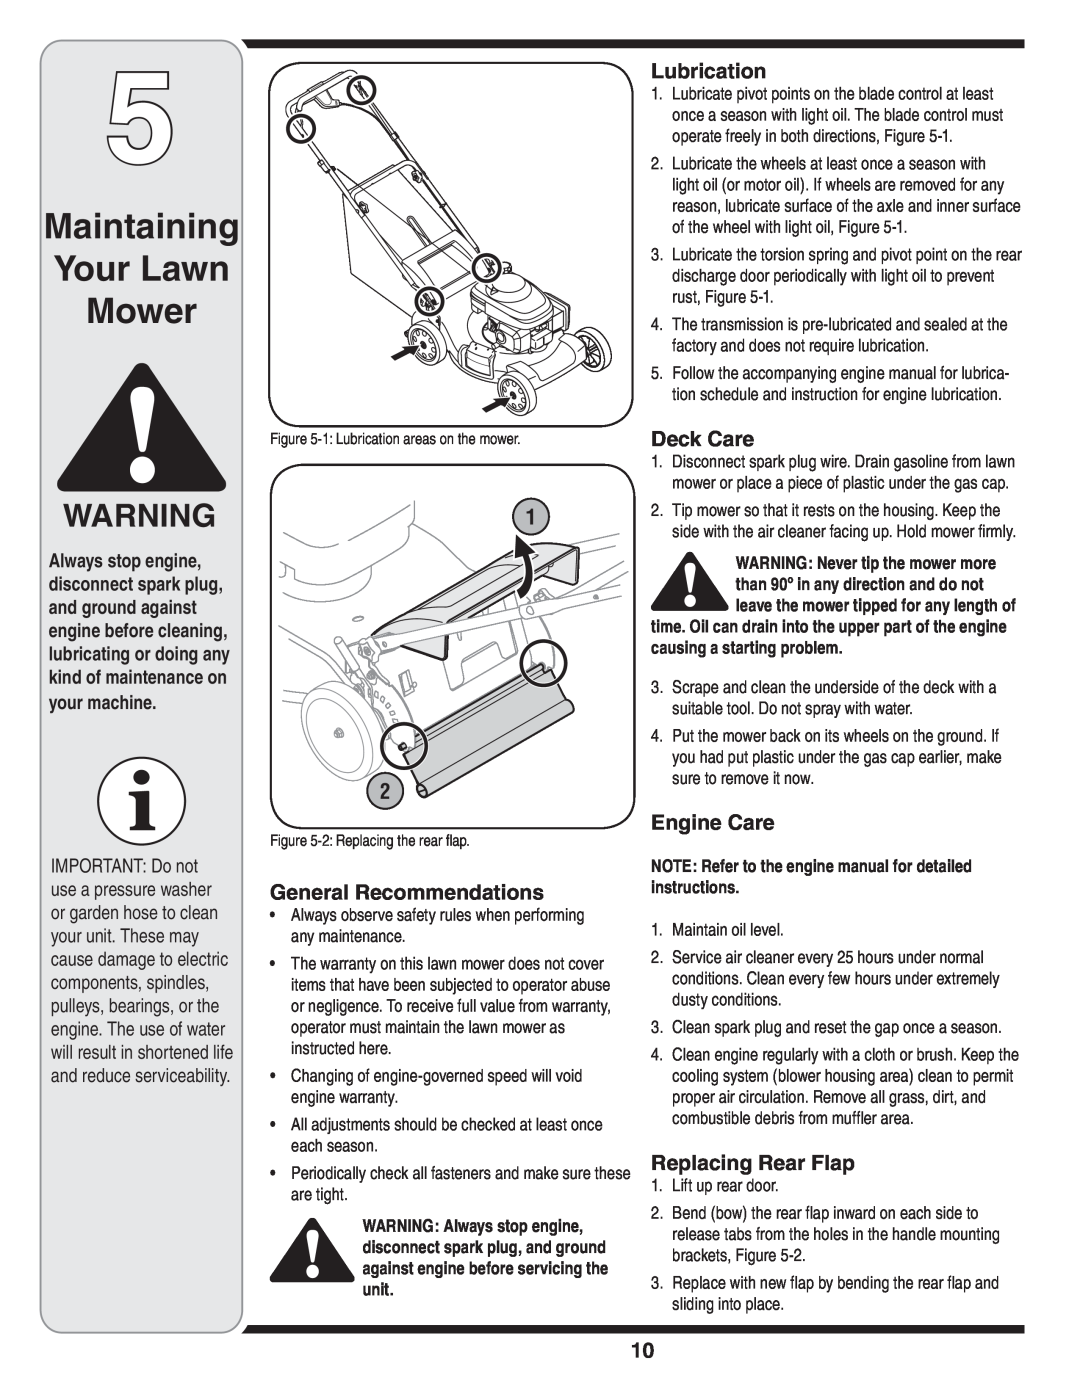 MTD 838 Maintaining Your Lawn Mower, General Recommendations, Lubrication, Deck Care, Engine Care, Replacing Rear Flap 